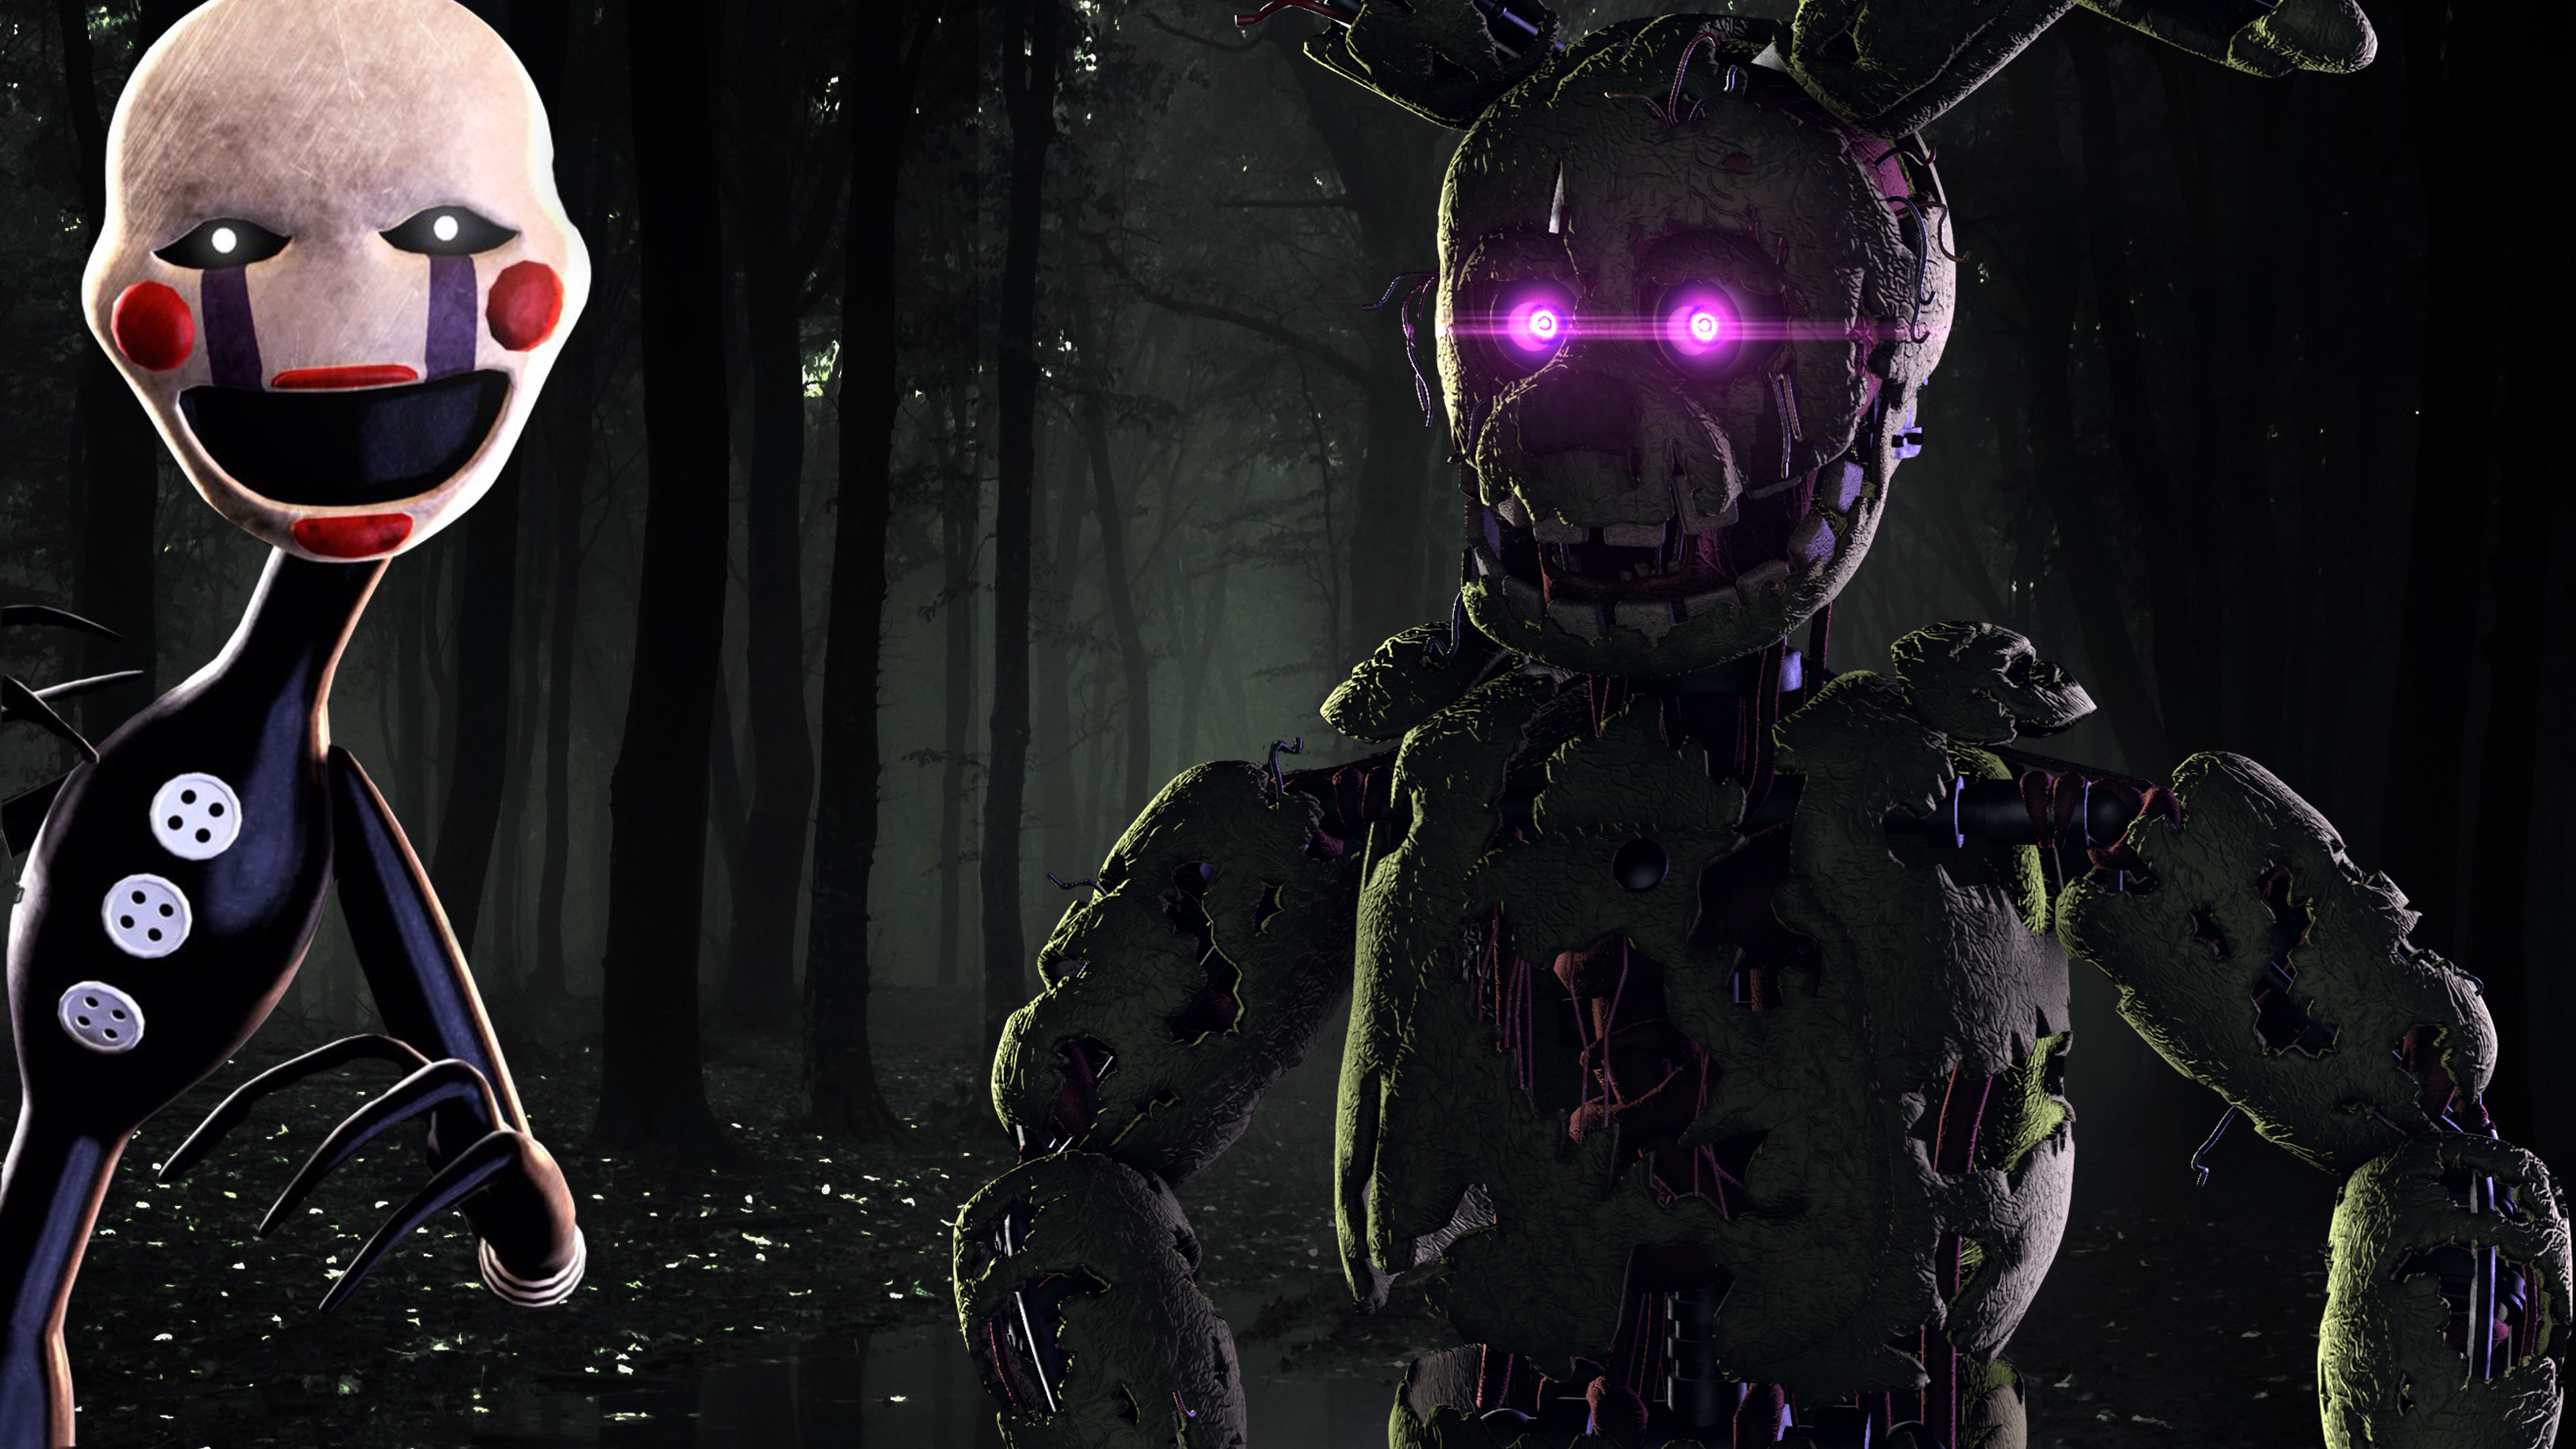 Springtrap and the Puppet by IK4Gamer